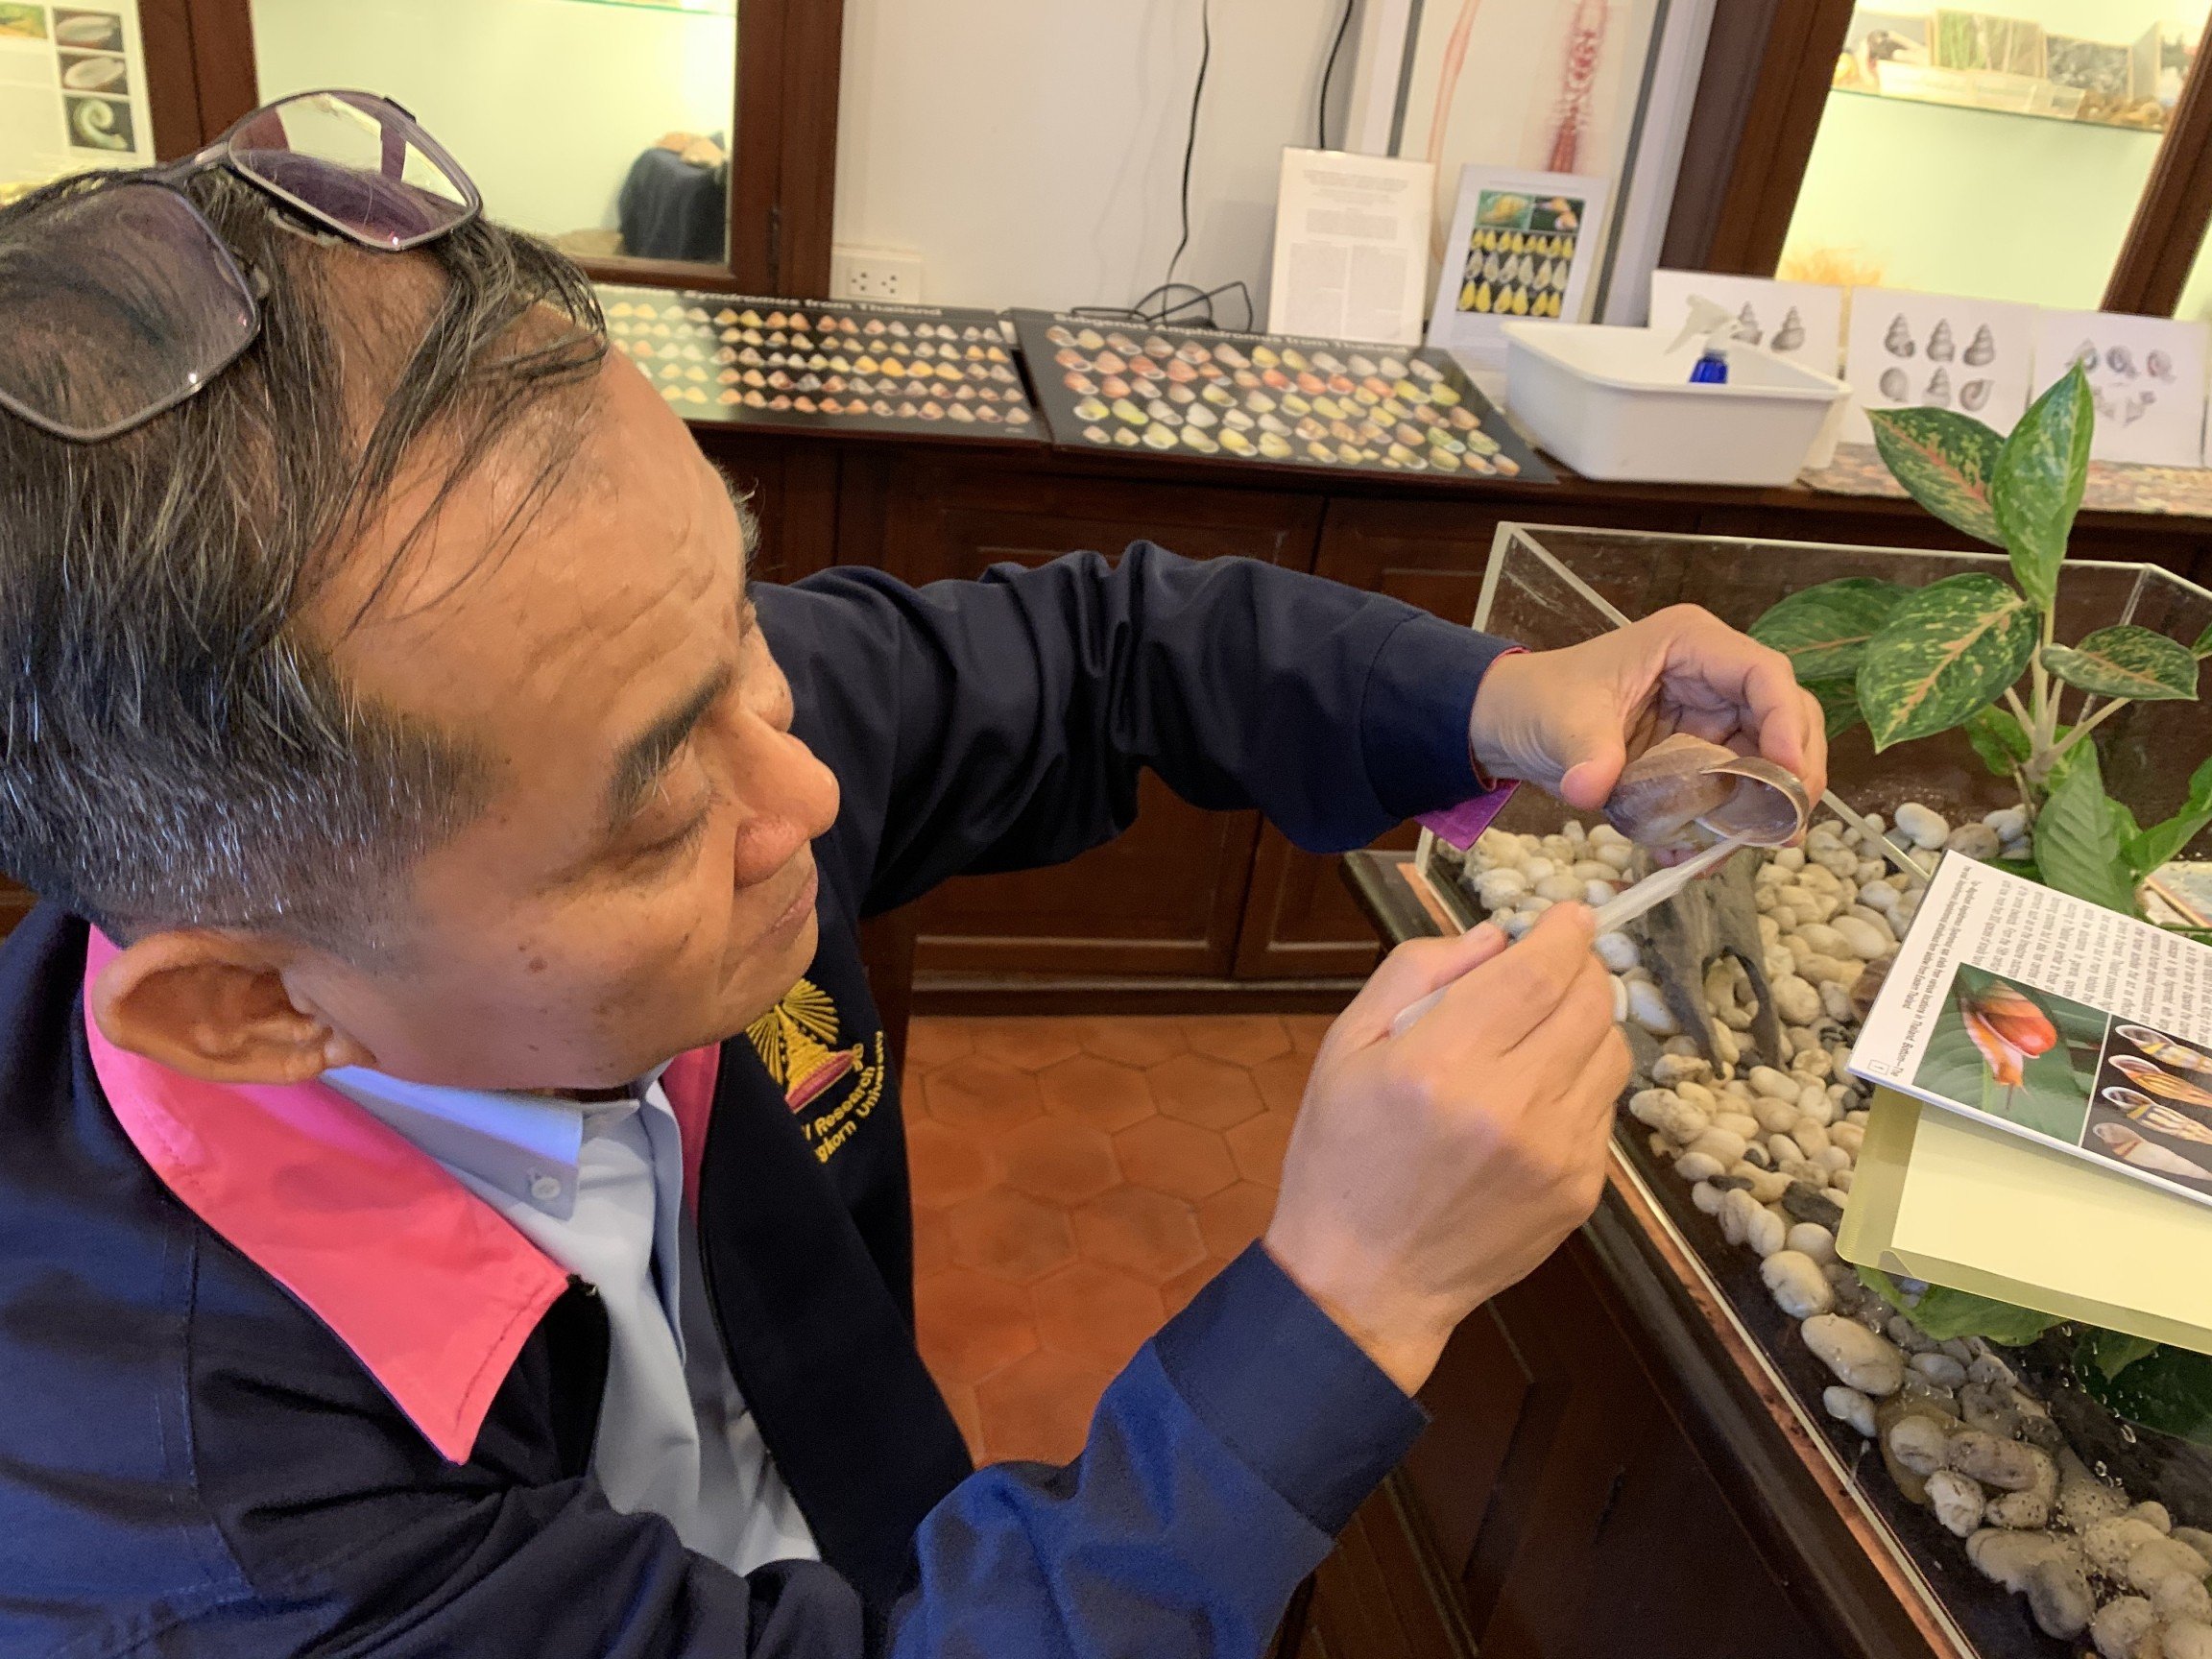 “People have discovered that if you raise a lot of snails — and you do it right — you can make much more than farming rice or working at 7-Eleven,” Somsak said. “But you’ll need to take it seriously to turn a profit.”  And, he adds, you need to collect the mucus with care. When stimulating the snail’s flesh, add a bit of water, he said. Not only does it provoke more secretion, but the moisture also comforts the snail, which has more nerve endings than most people think.  But if snails are such sensitive creatures, does the prodding annoy them? Somsak said he’s heard people online likening snail mucus collection to torture.  “But it’s not torture at all. You can do it gently. And they’re going to ooze out that slime anyway, simply by moving from place to place,” he said. “It’s surely not as bad as roasting them alive. That’s way more harsh.”  Indeed, the Hemiplecta distincta isn’t some rare species he plucked from a remote corner of Thailand. It’s literally a garden variety snail — and upcountry Thais have been eating them for ages, often after grilling them in their shells, plucking out the flesh and dipping them in a tangy, chili-flecked sauce.  They’re apparently quite tasty. But Somsak wouldn’t know.  “No way. Never tried it,” he said. “I just don’t have the heart to eat a snail.”